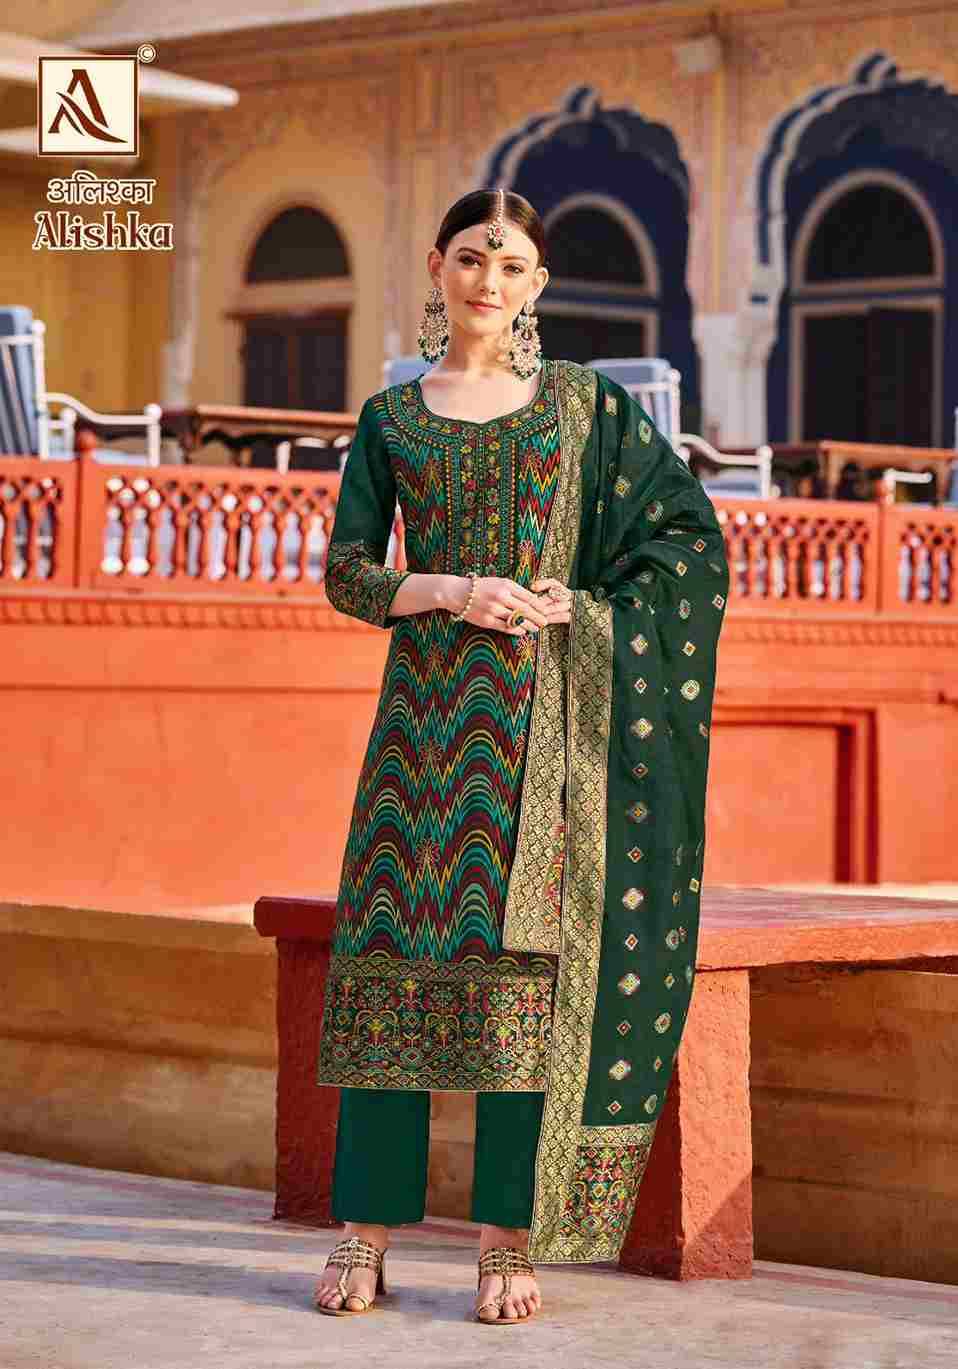 Alishka By Alok Suit 1458-001 To 1458-006 Series Indian Traditional Wear Collection Beautiful Stylish Fancy Colorful Party Wear & Wear Pure Jacquard Dress At Wholesale Price